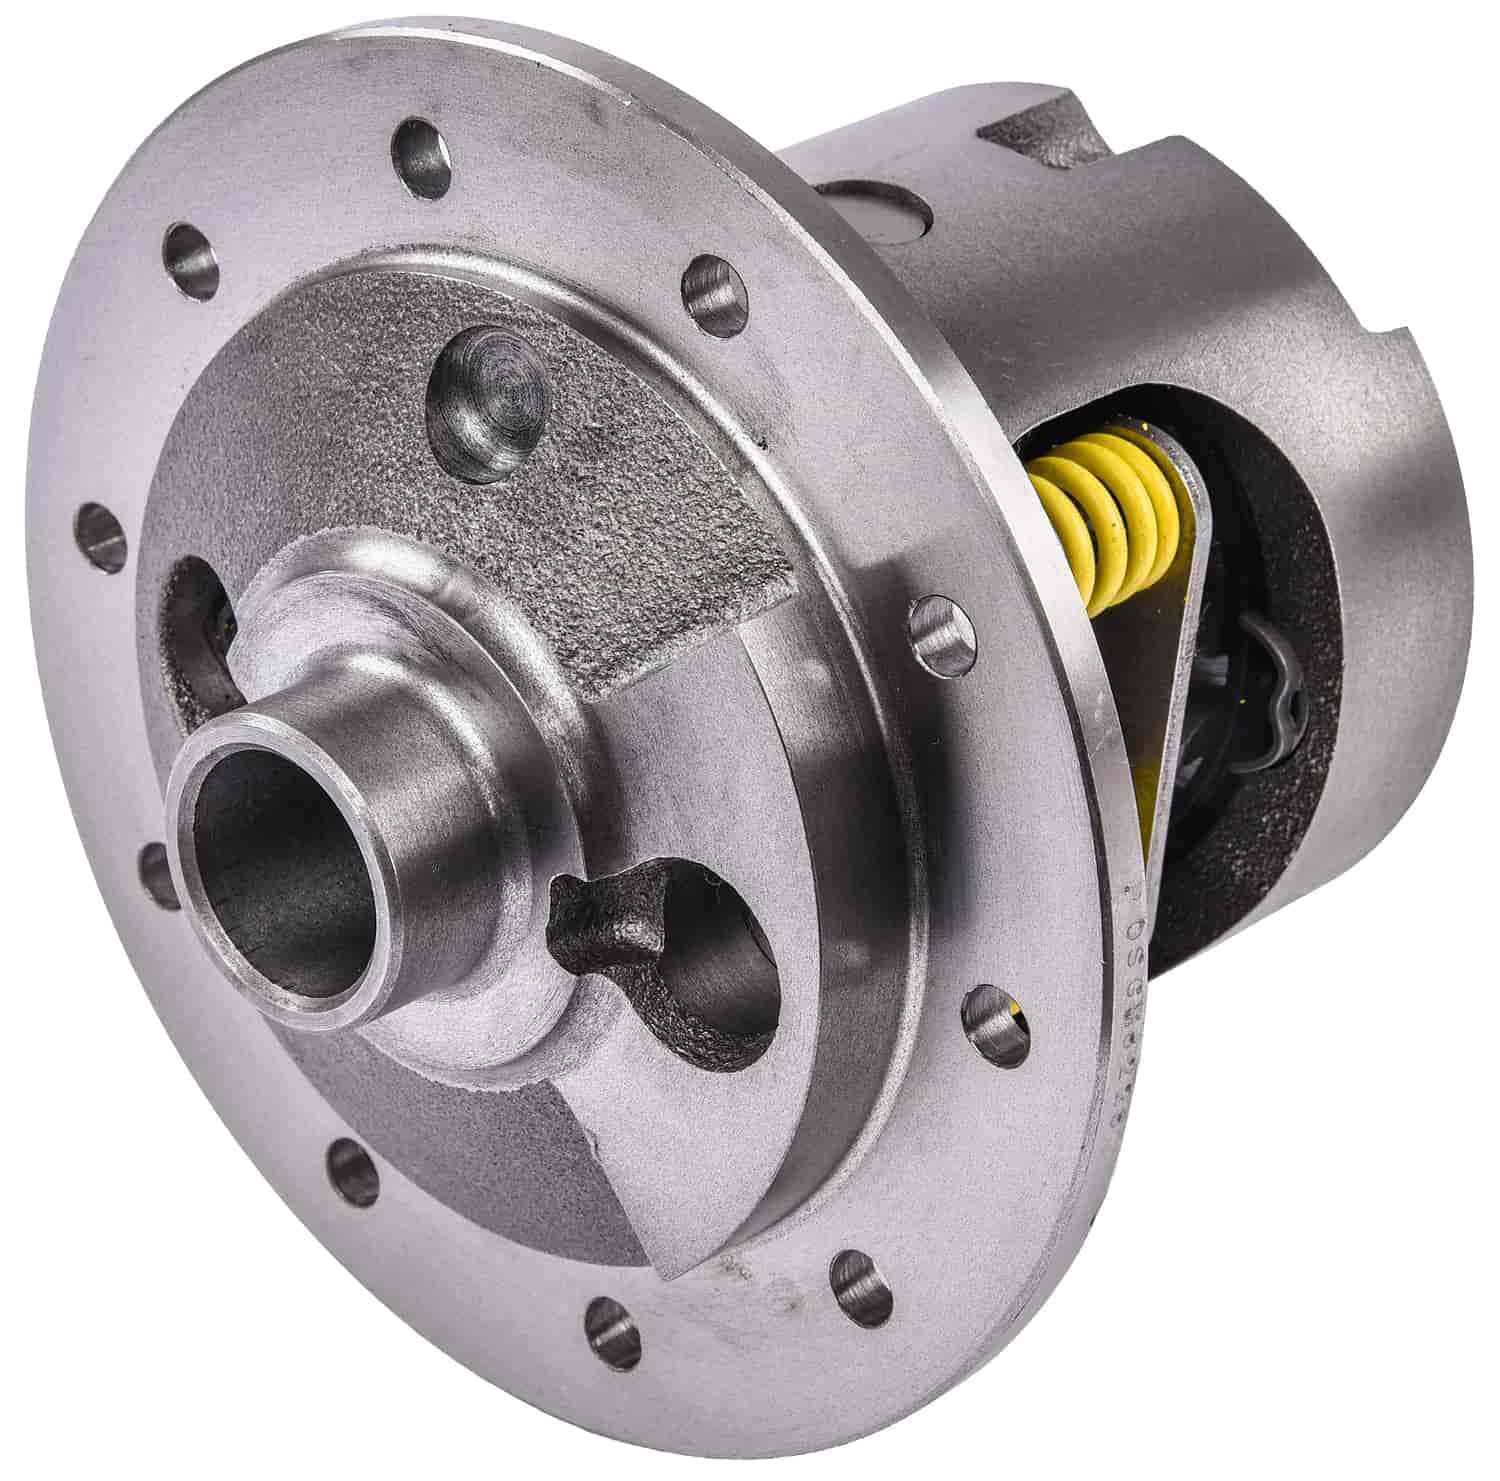 Posi Traction Differential for GM Car 10-Bolt Rear,